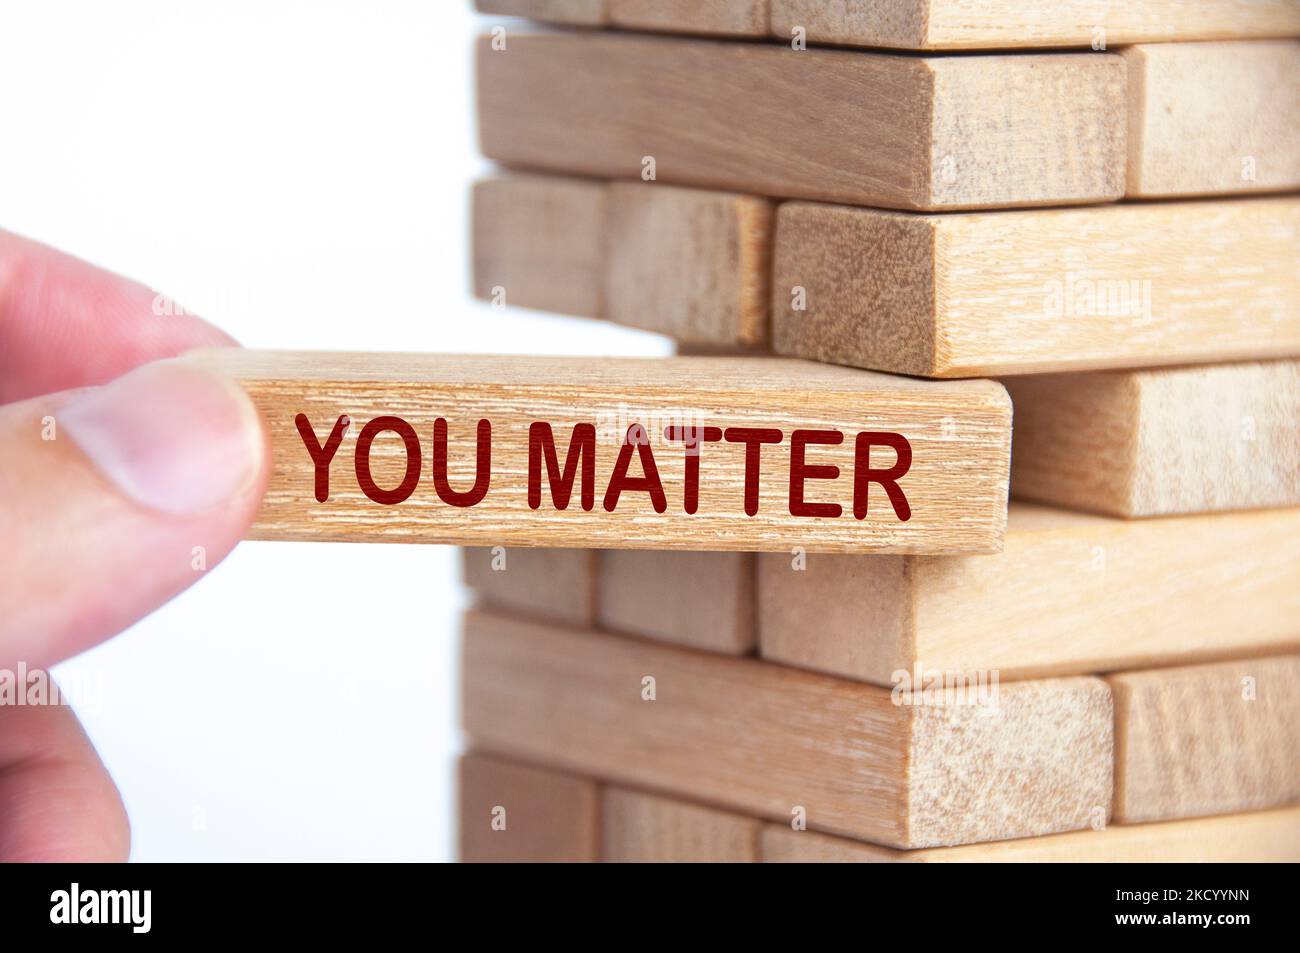 Hand holding a wooden block with text - You Matter to stabilize the entire wooden stacks. Inspirational concept. Stock Photo